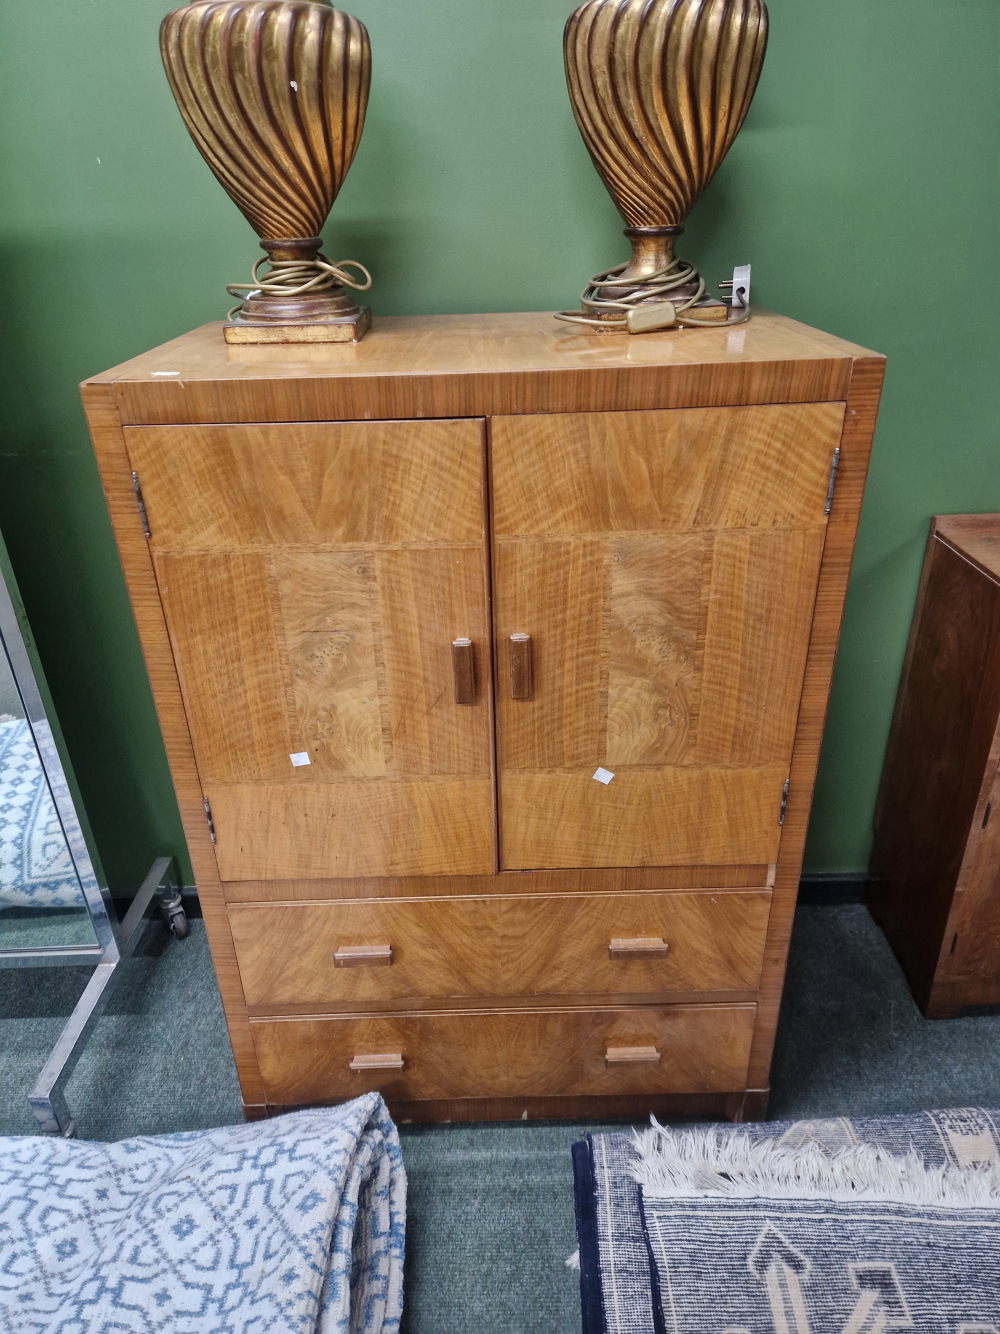 AN ART DECO WALNUT CORNER DRESSING TABLE AND STOOL TOGETHER WITH A TALLBOY CABINET - Image 14 of 31